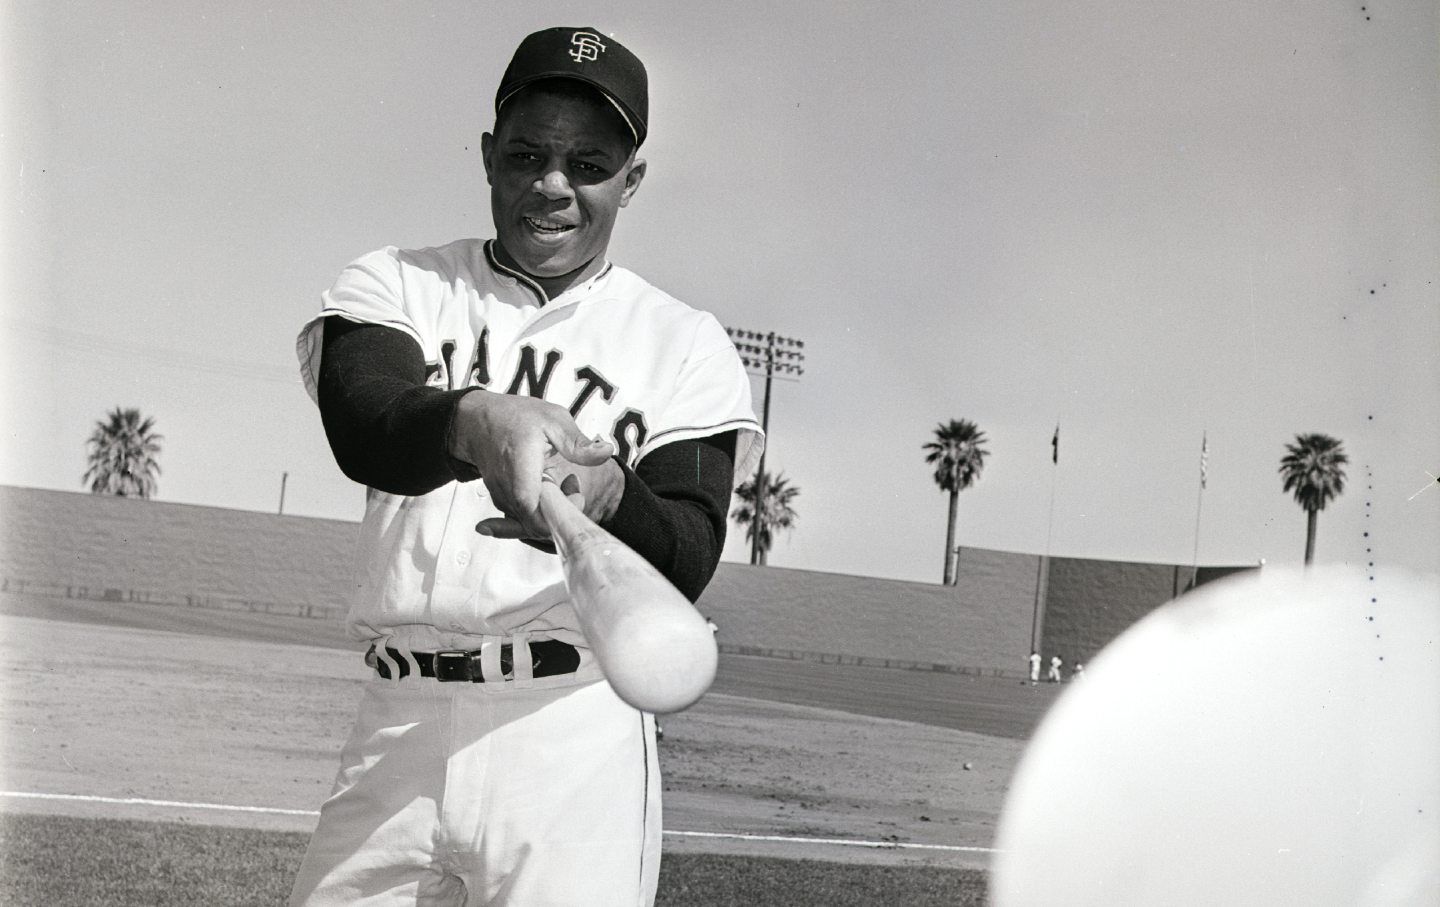 San Francisco Giant center fielder Willie Mays swings his bat during spring training in Phoenix, Arizona, on February 24, 1961.